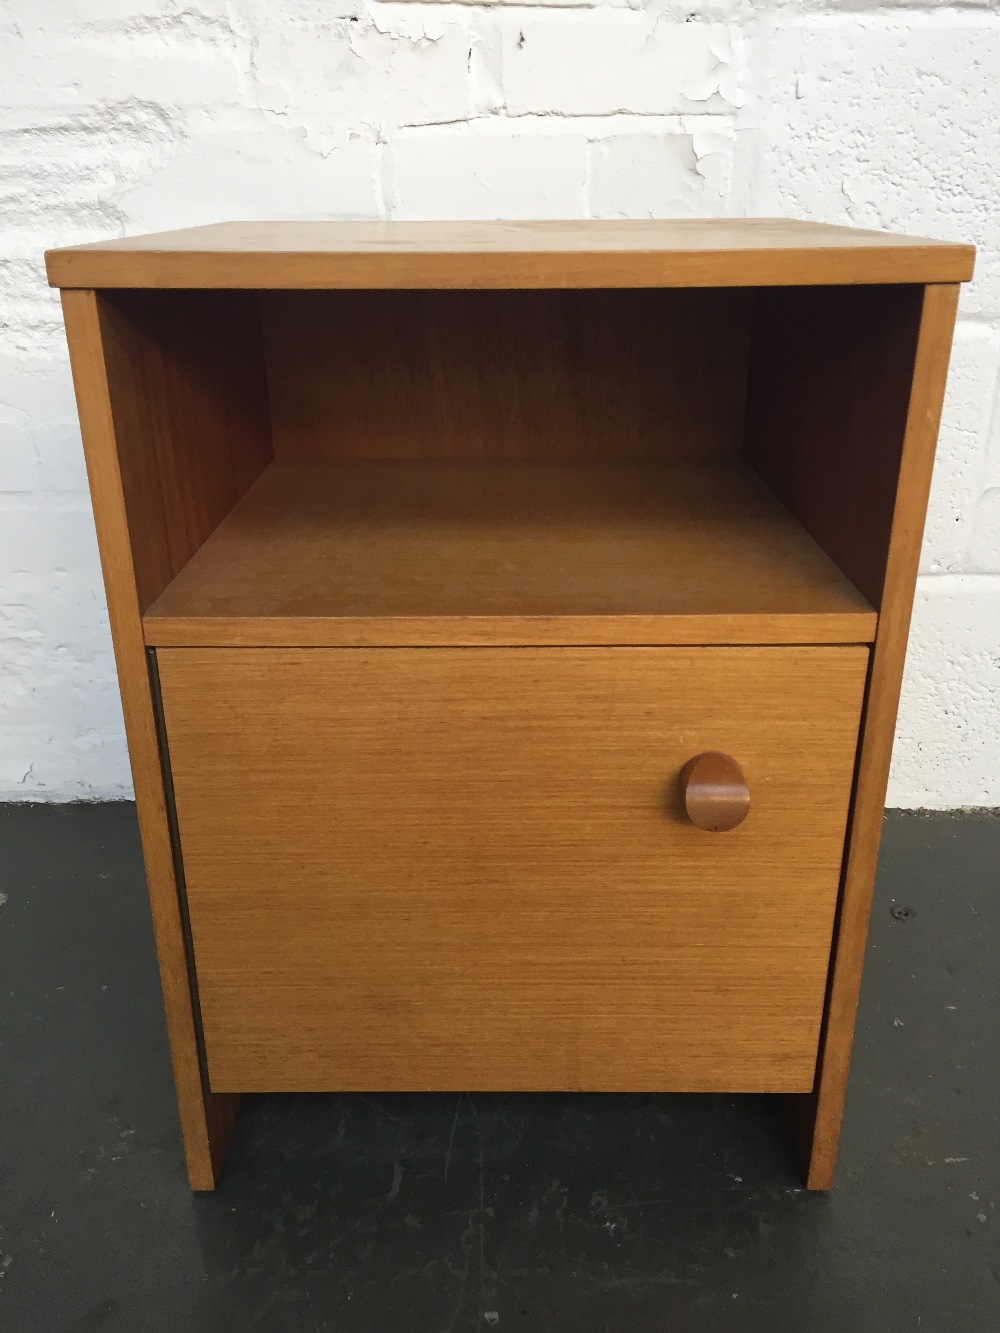 A mid-century bedside table by Avalon single shelf with cupboard below 55cmH x 40 x 38